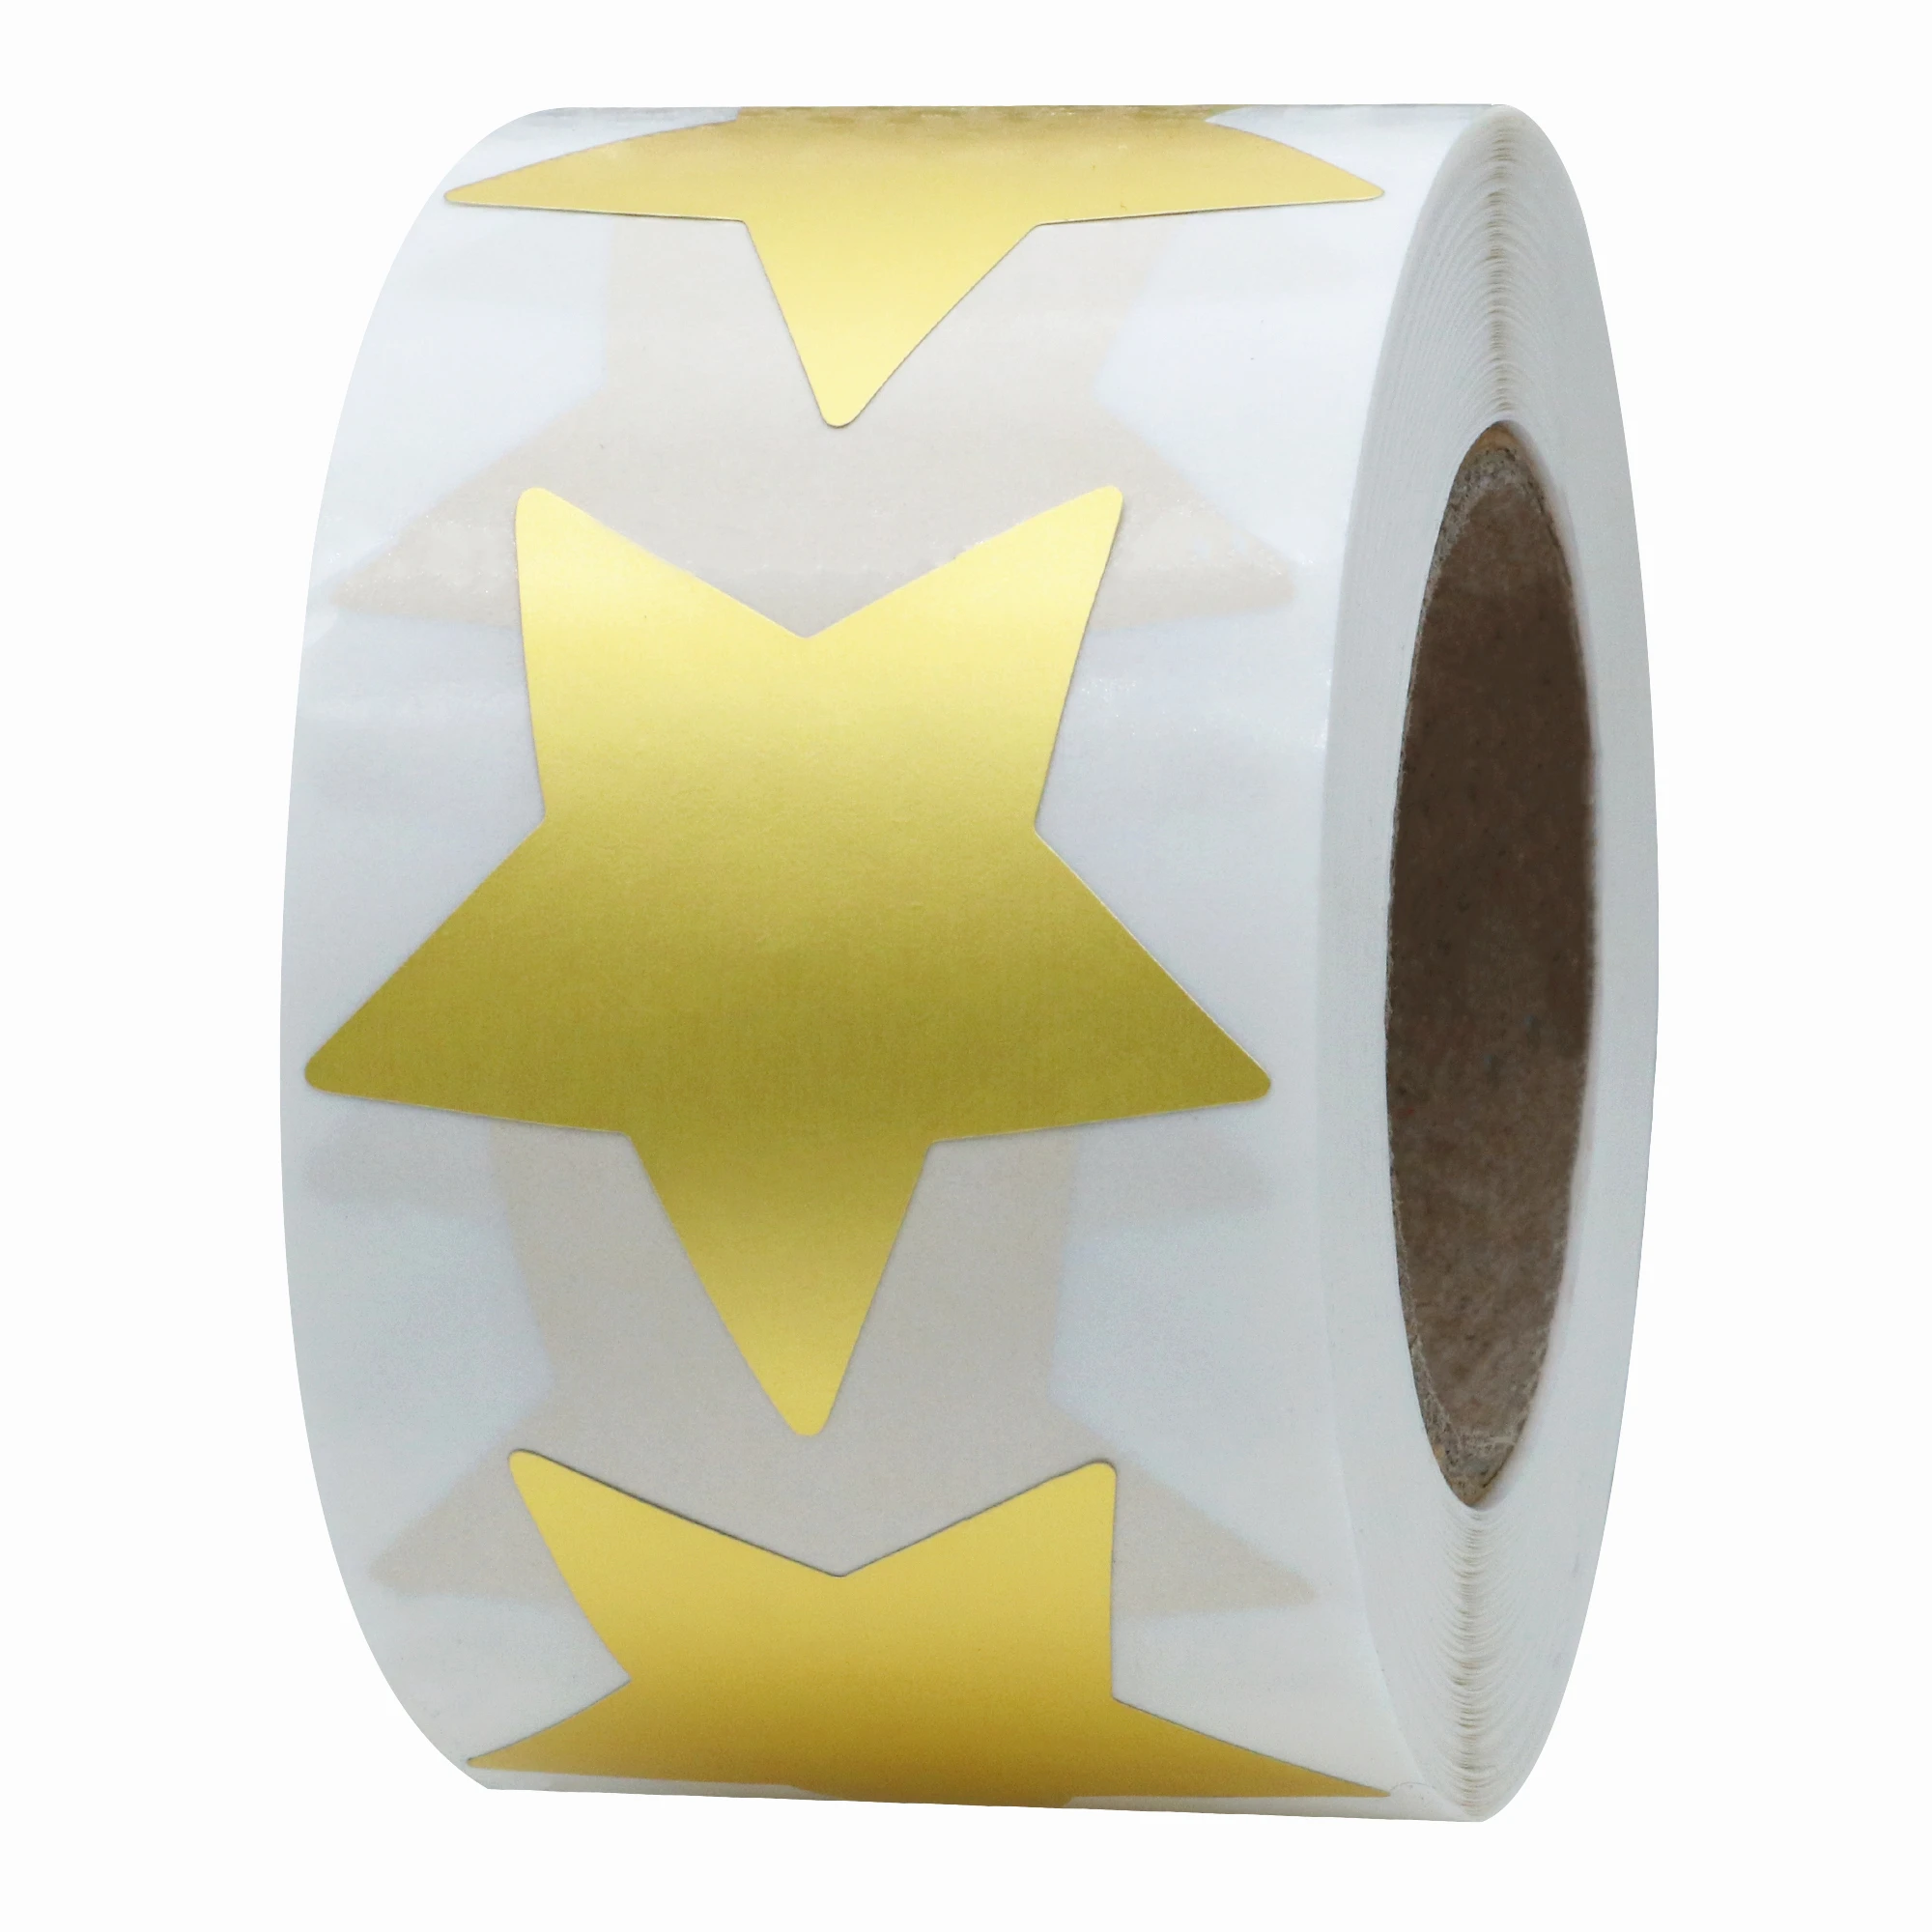 Hybsk Gold Star Stickers For Kids Reward Metallic Foil Star Labels 1.5 Inch  500 Total Per Roll - Buy Hybsk Gold Star Stickers For Kids Reward Metallic  Foil Star Labels 1.5 Inch